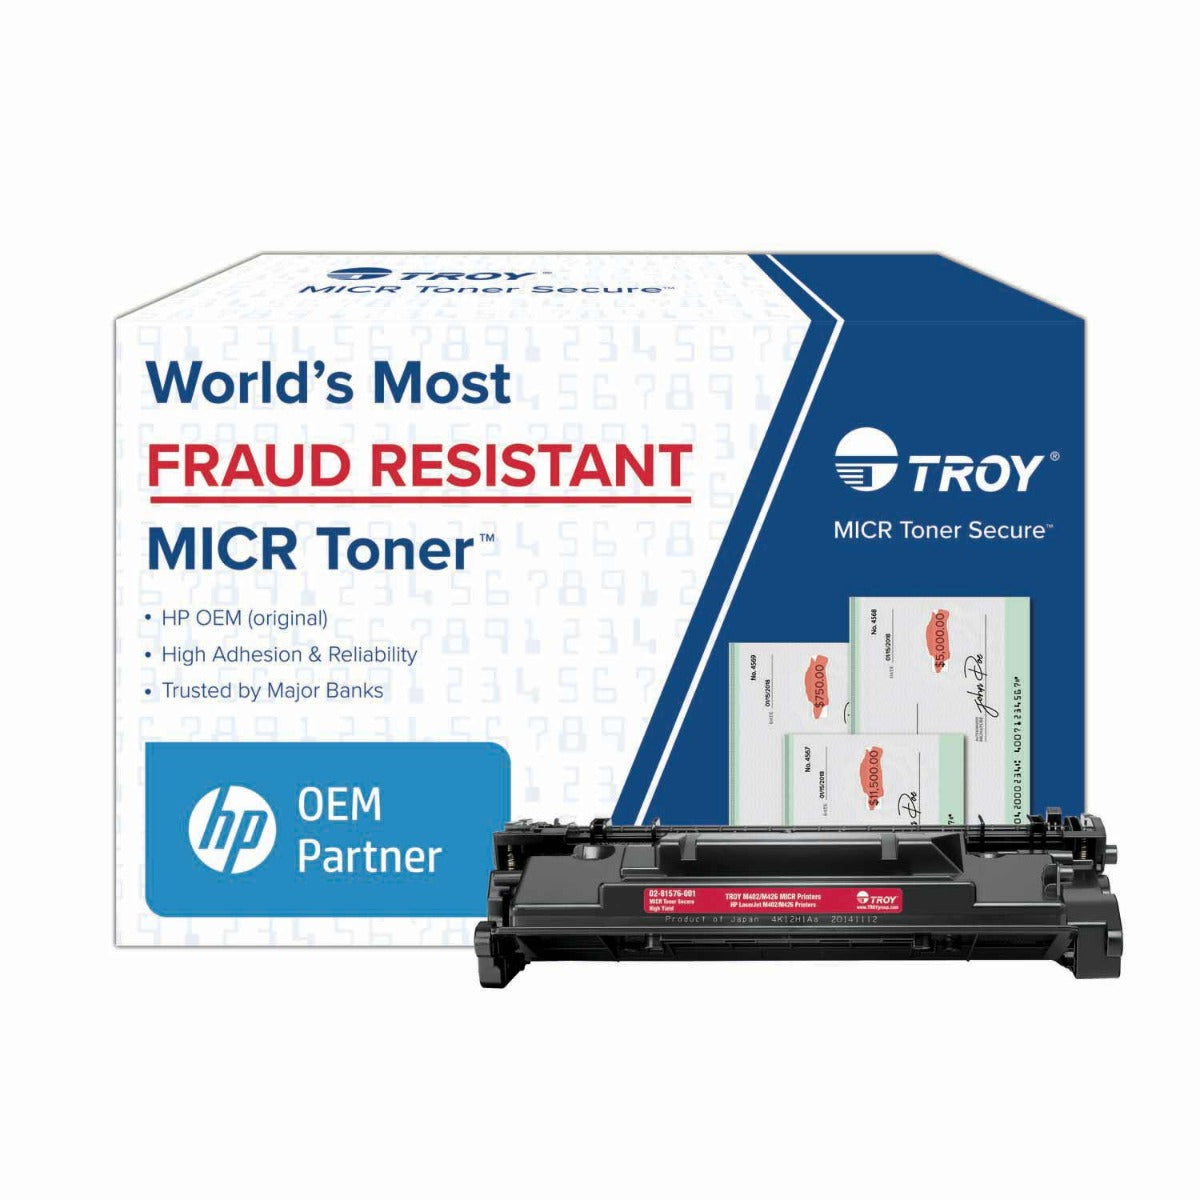 TROY M402/M426 MICR Toner Secure High Yield Cartridge (Coordinating HP Part Number: CF226X)